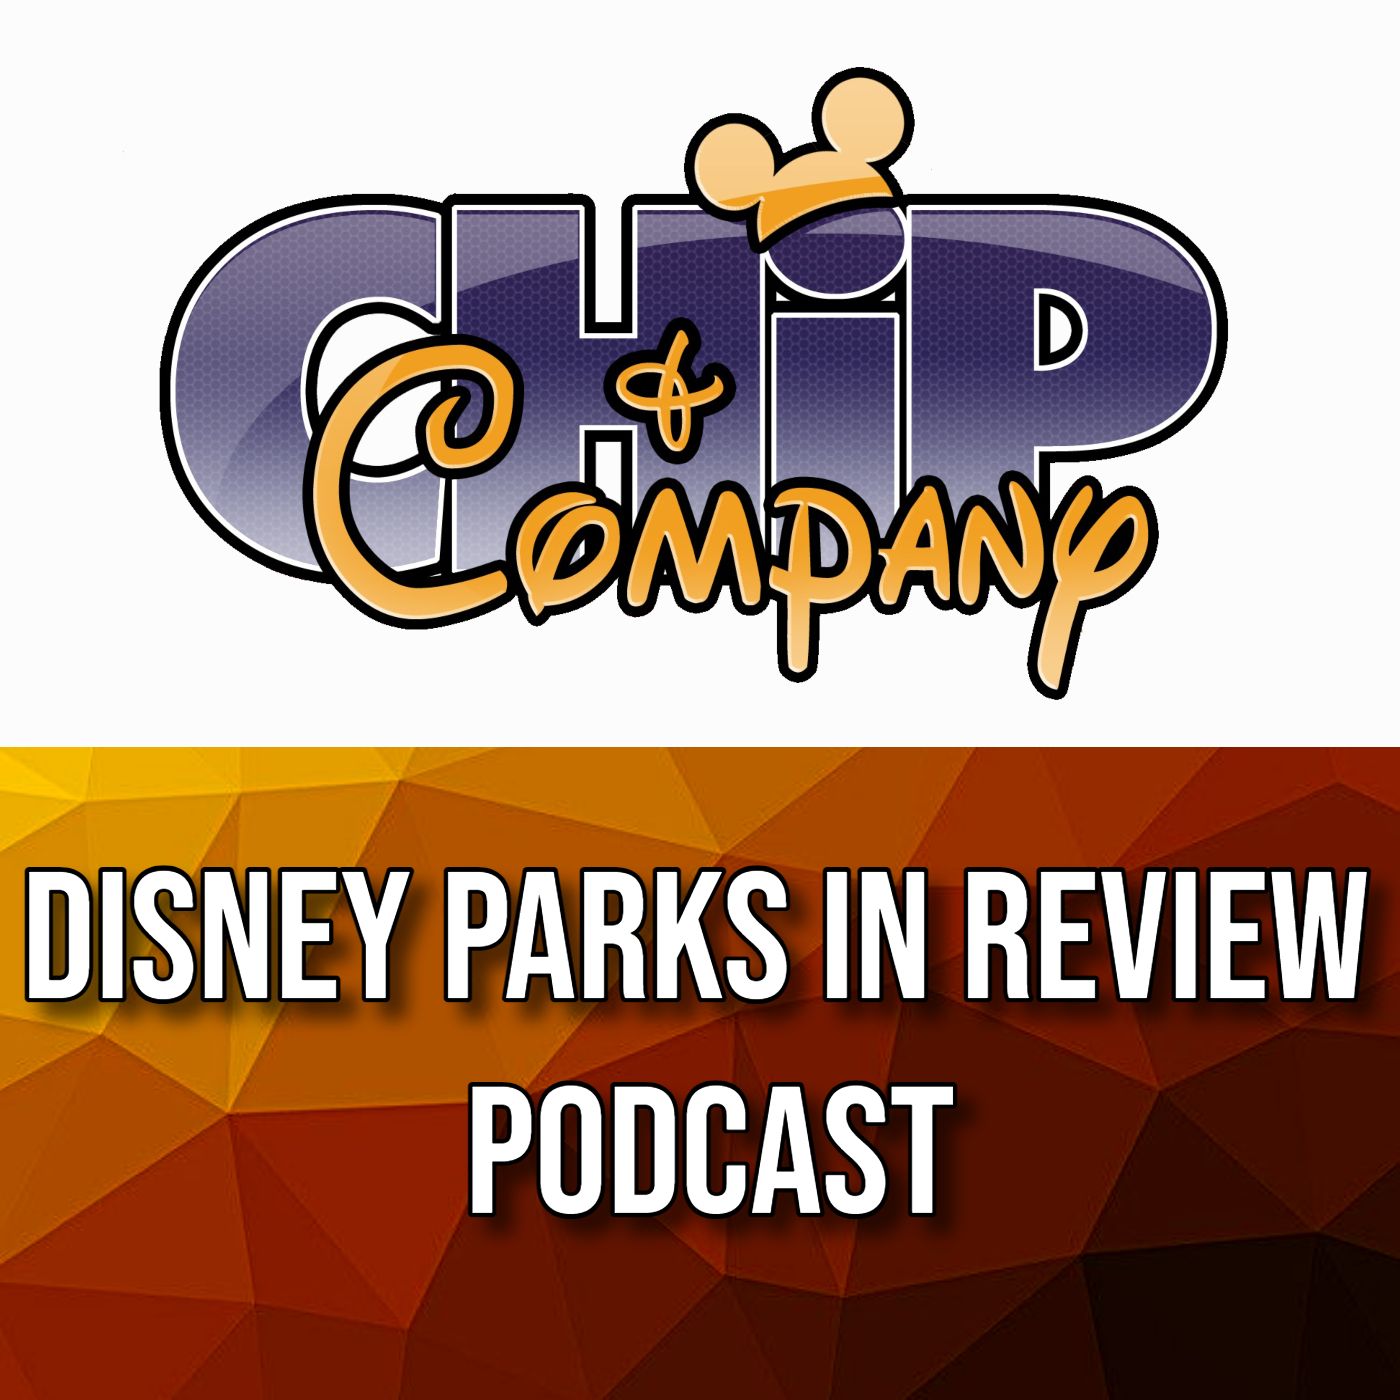 Disney Parks in Review - Trams in the Wild, TONS of New Disney Merchandise and More Image